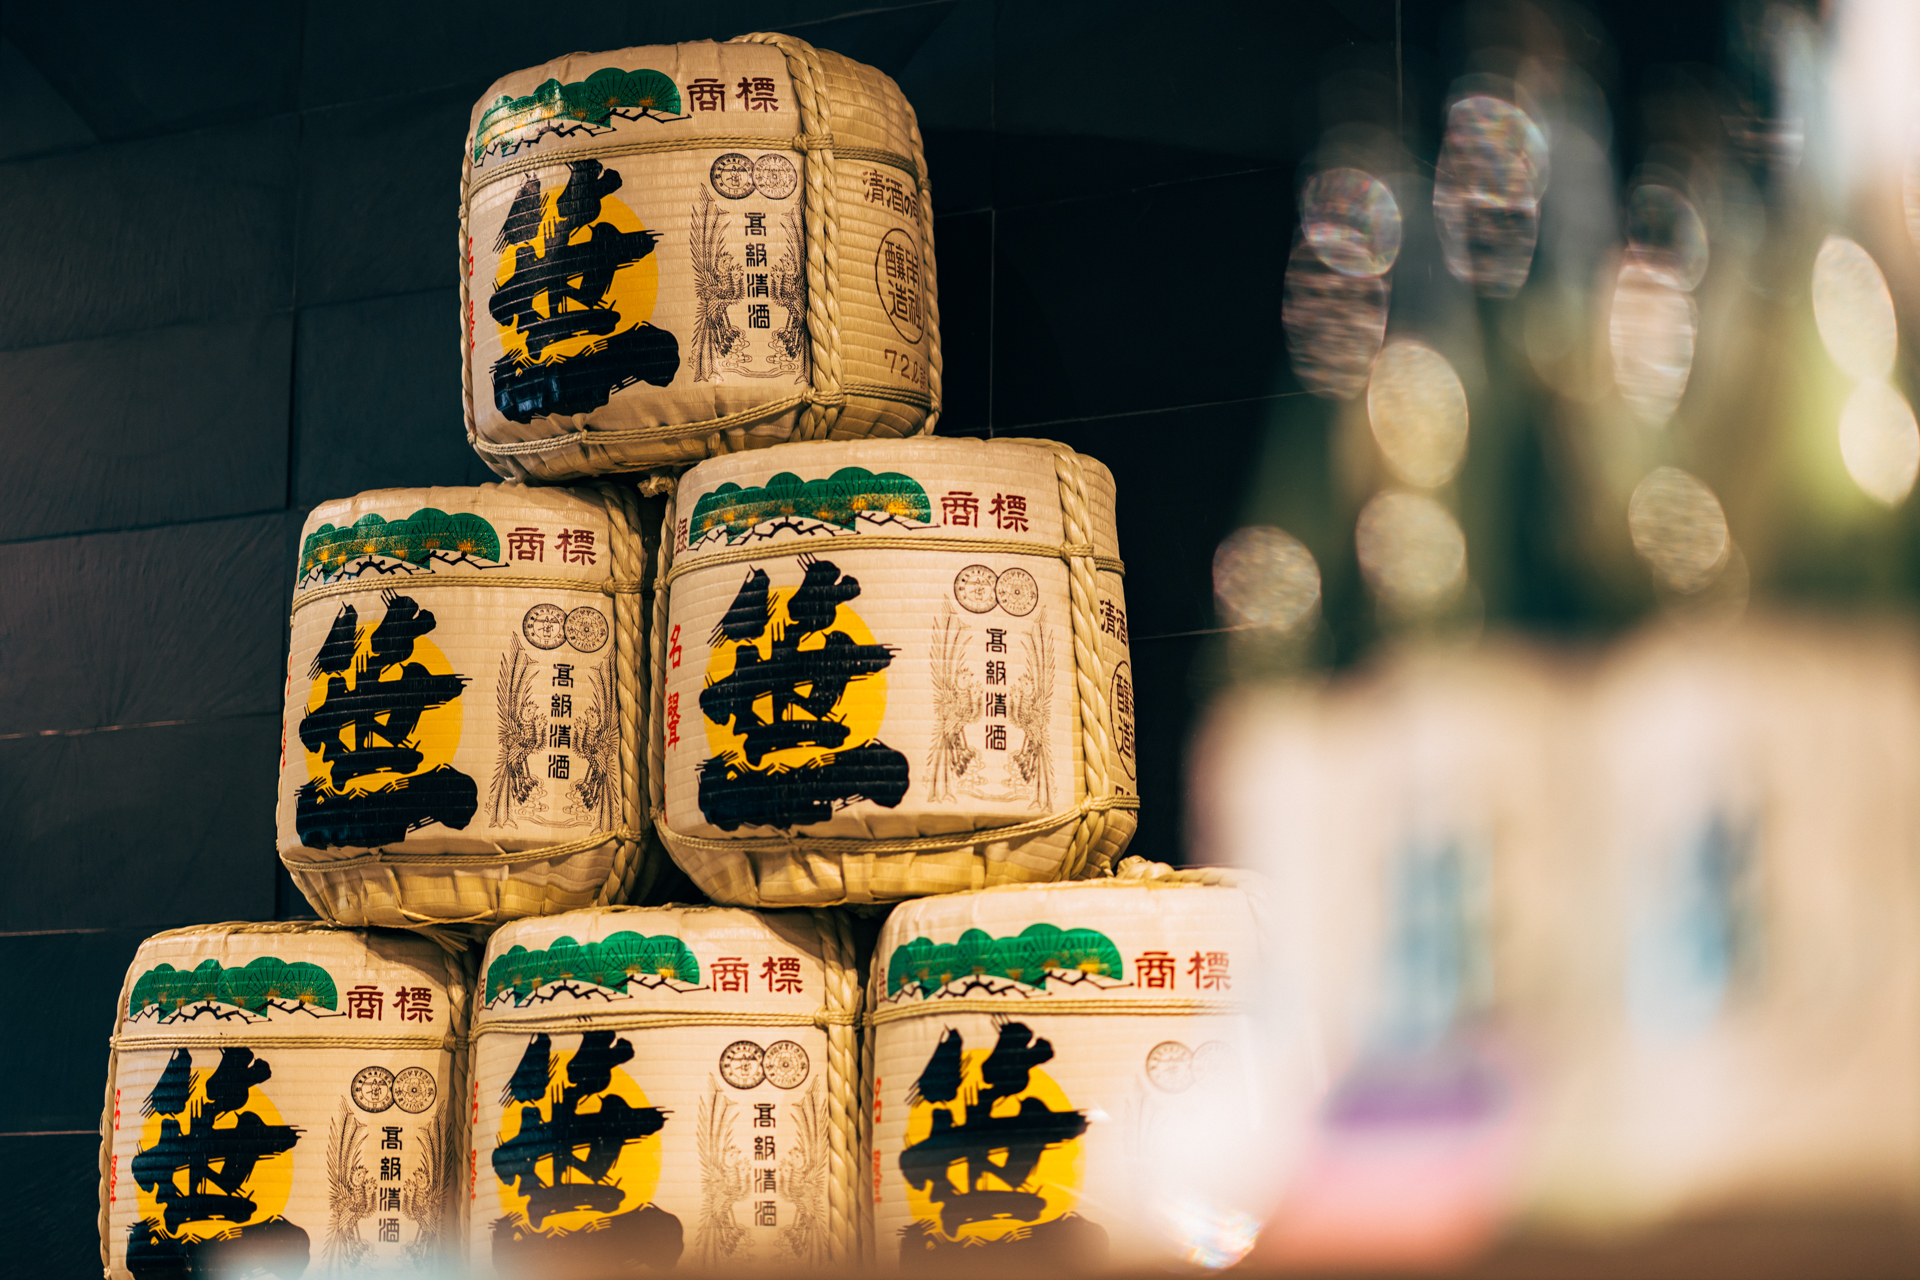 Over 360 years later, the Sasaiichi Sake Brewery aims to make the best sake in Japan.